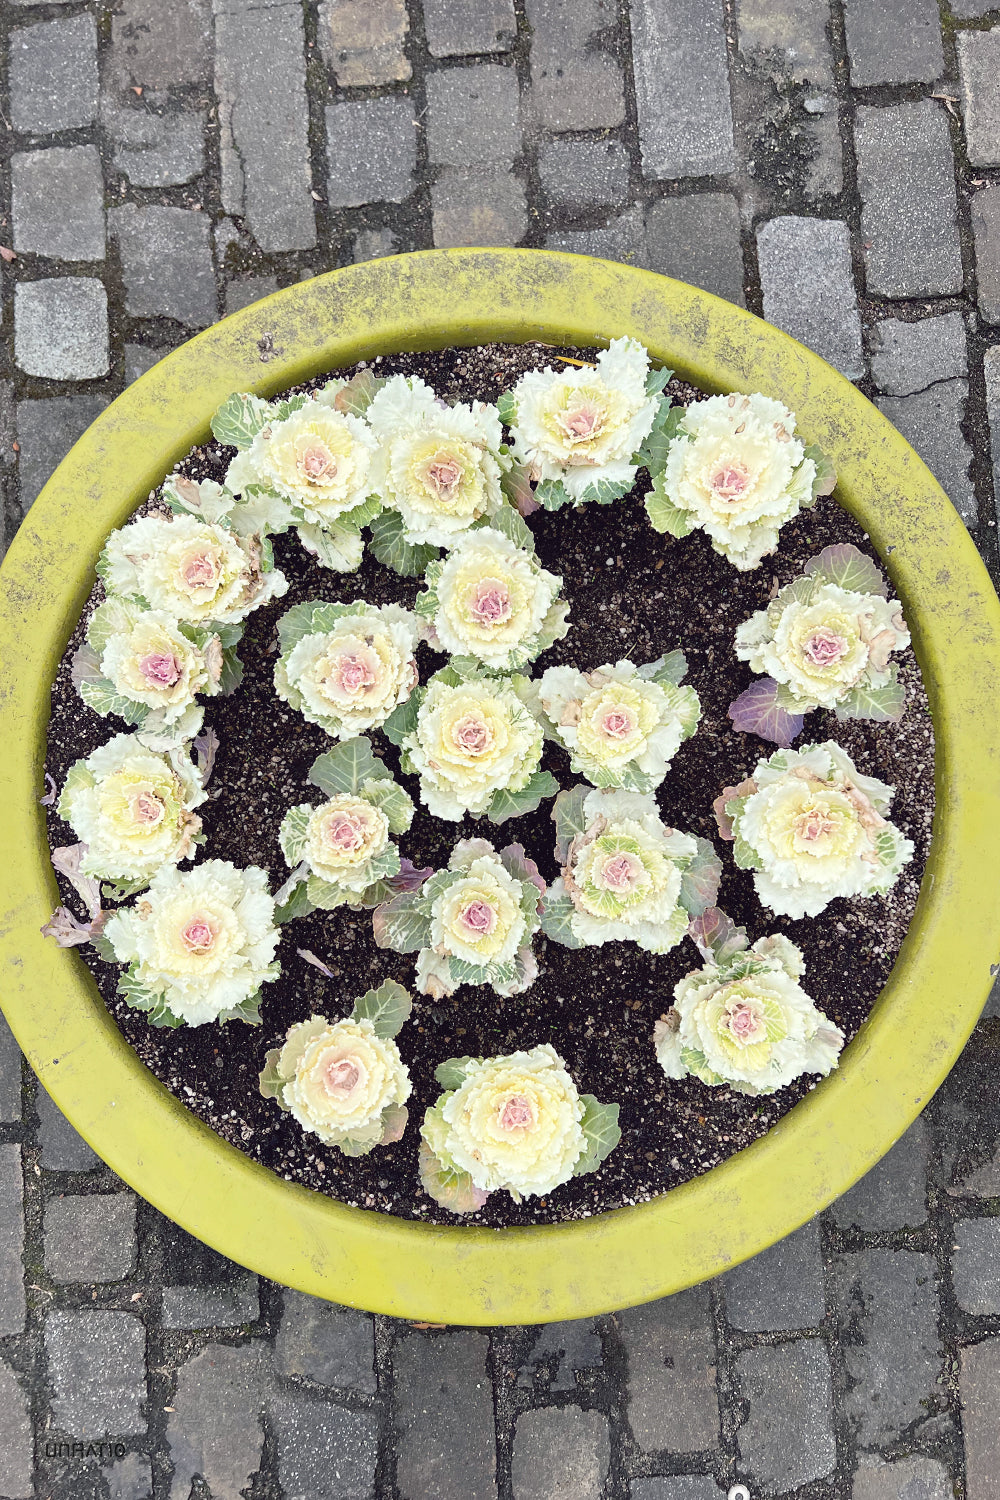 Arrangement of pale yellow ornamental cabbages with pink centers in a large yellow pot, set on a cobblestone surface, showcasing urban horticulture.